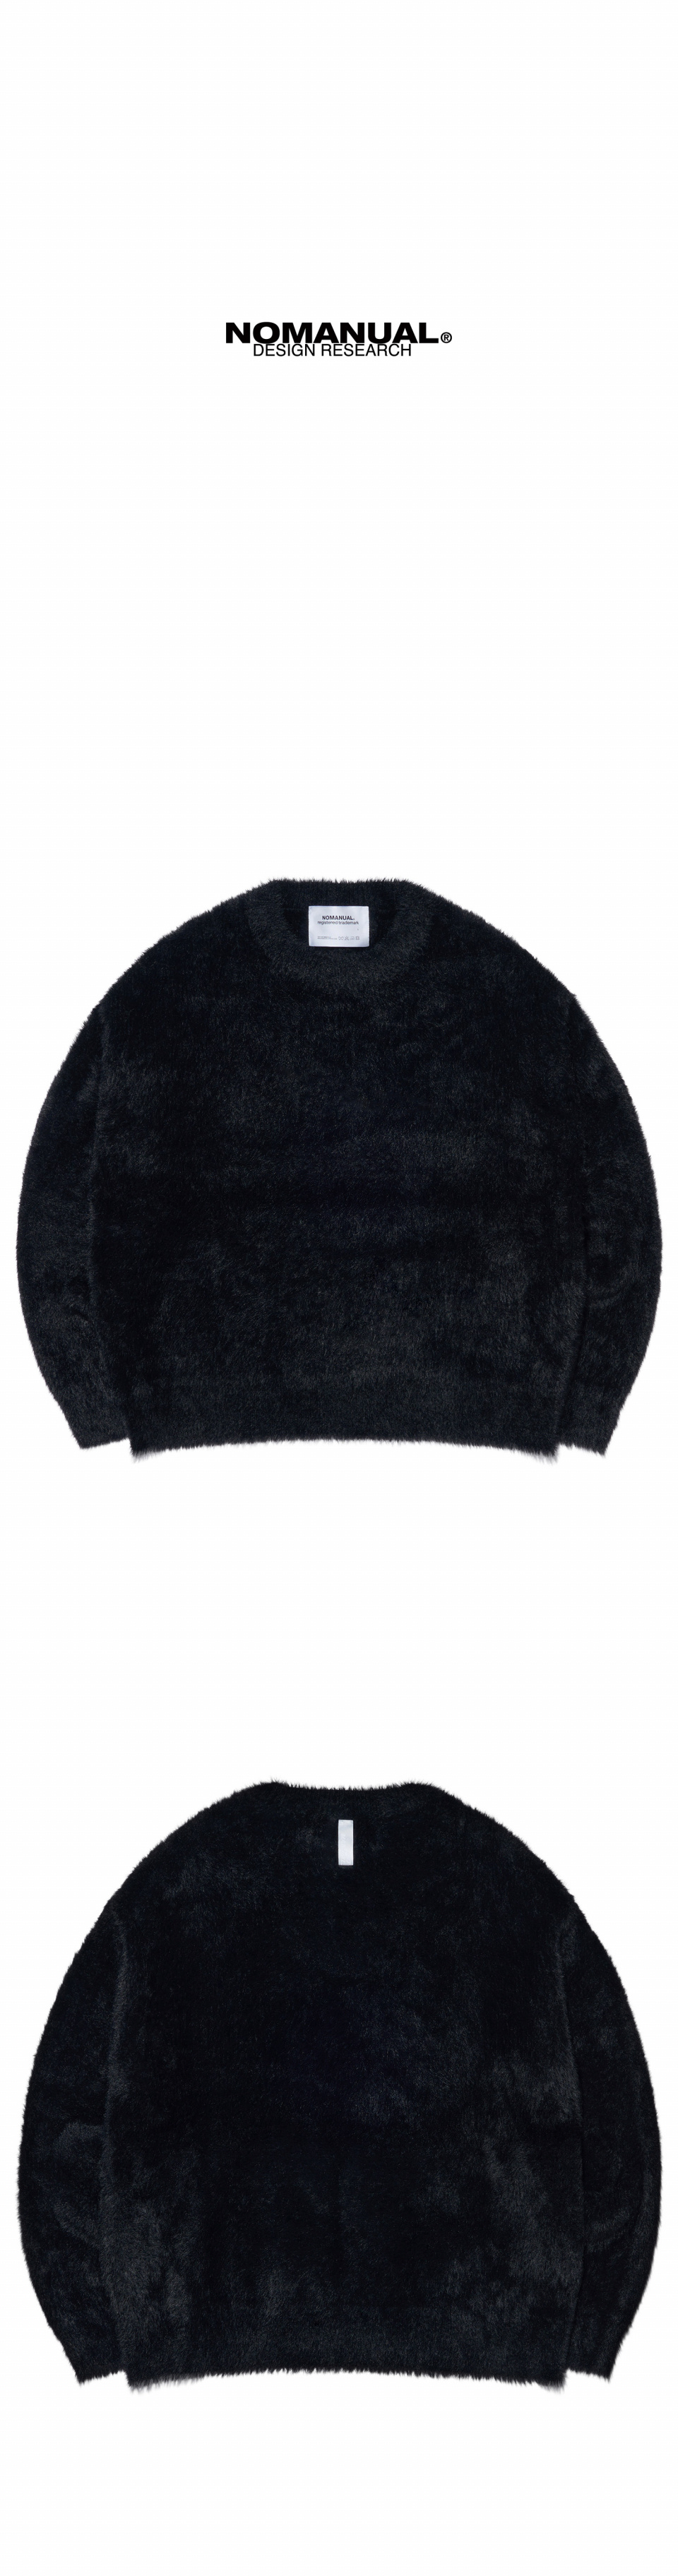 CROPPED HAIRY KNIT - BLACK